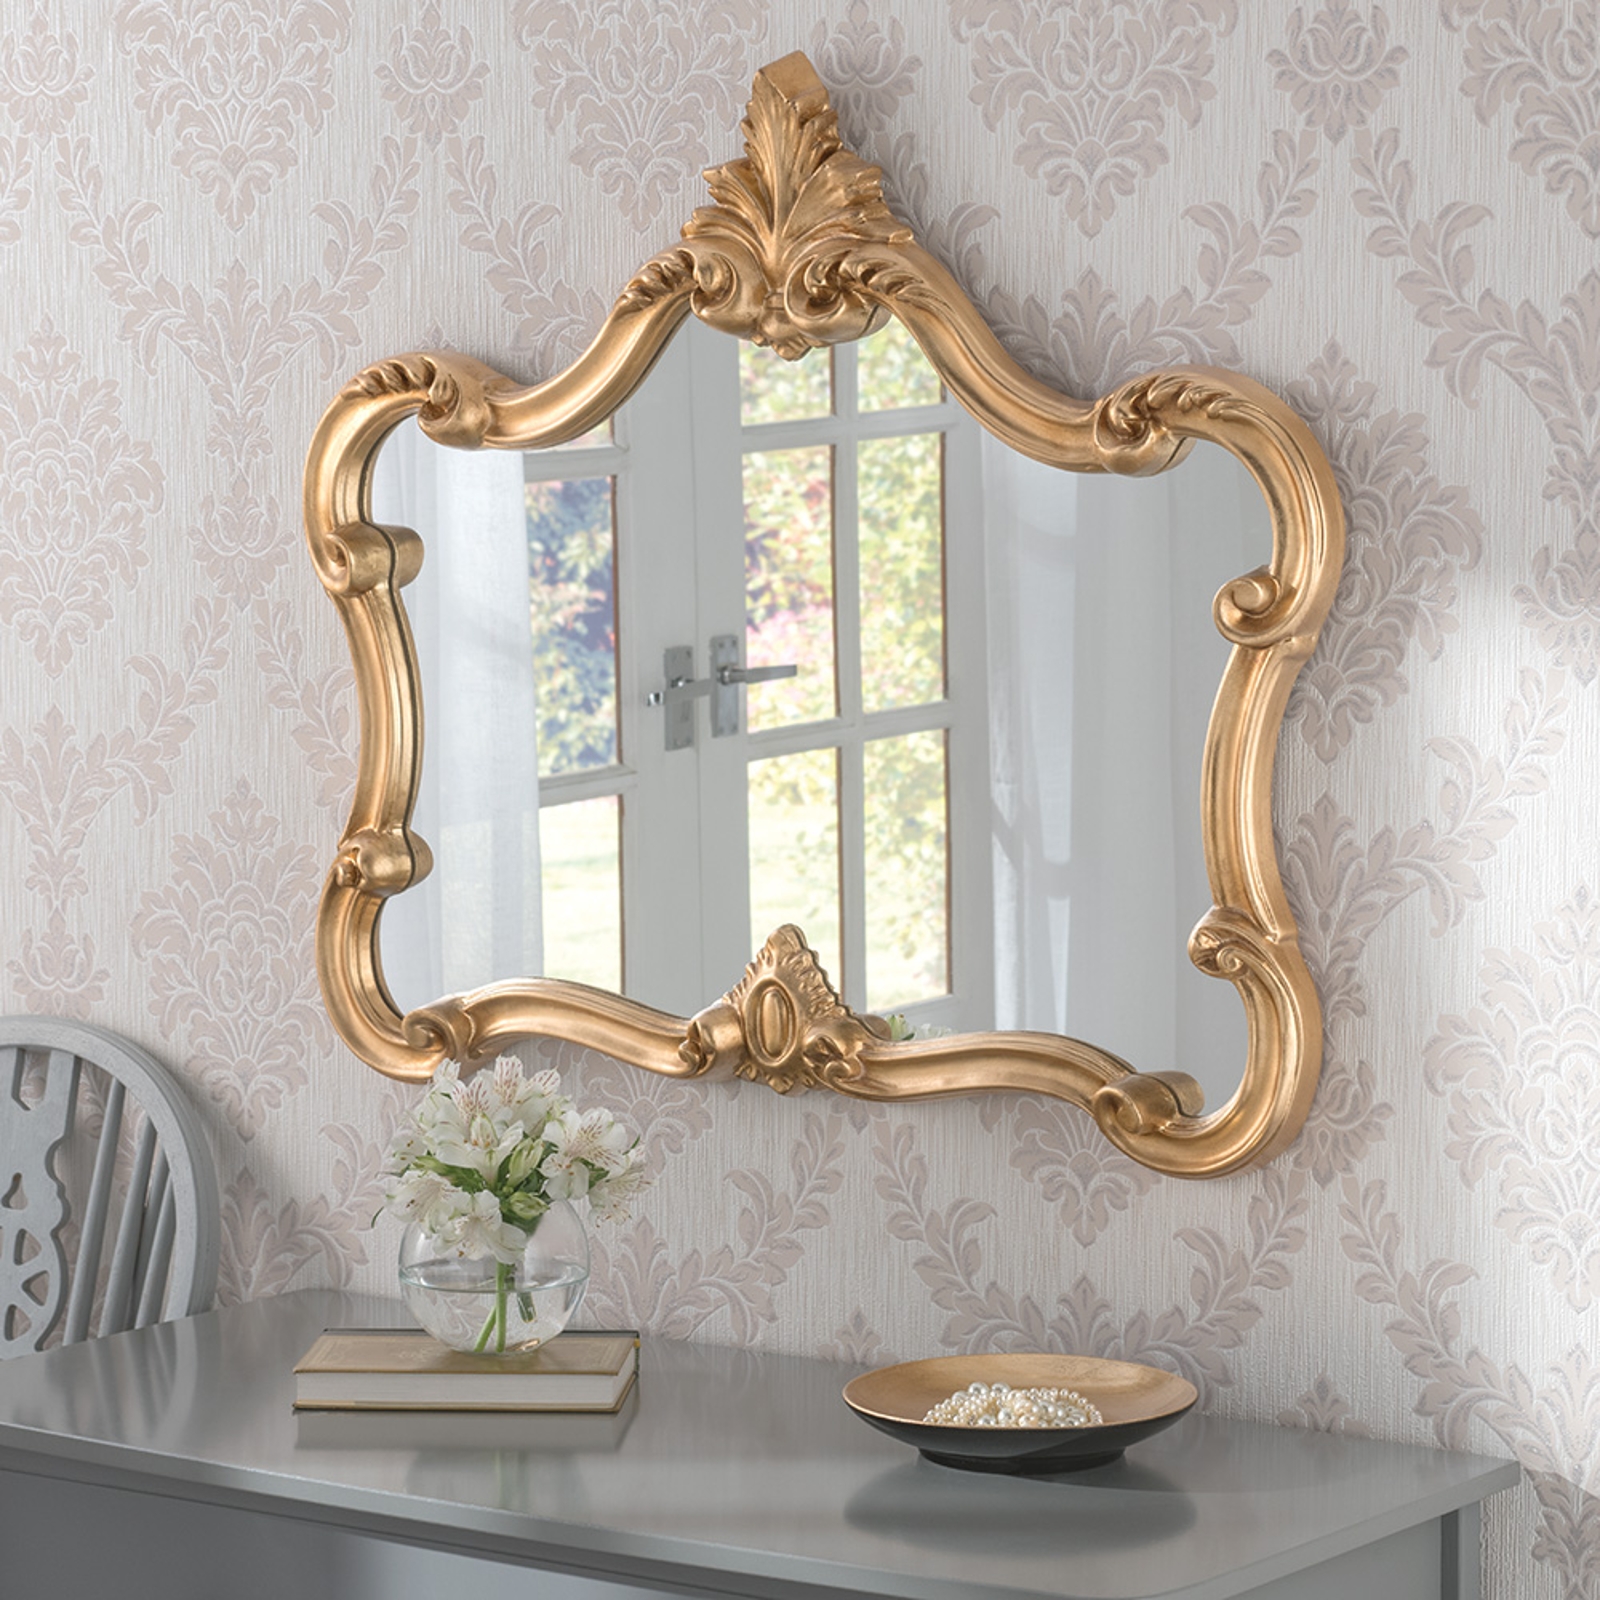 Crested Large Decorative Ornate Framed Wall Mirror Gold